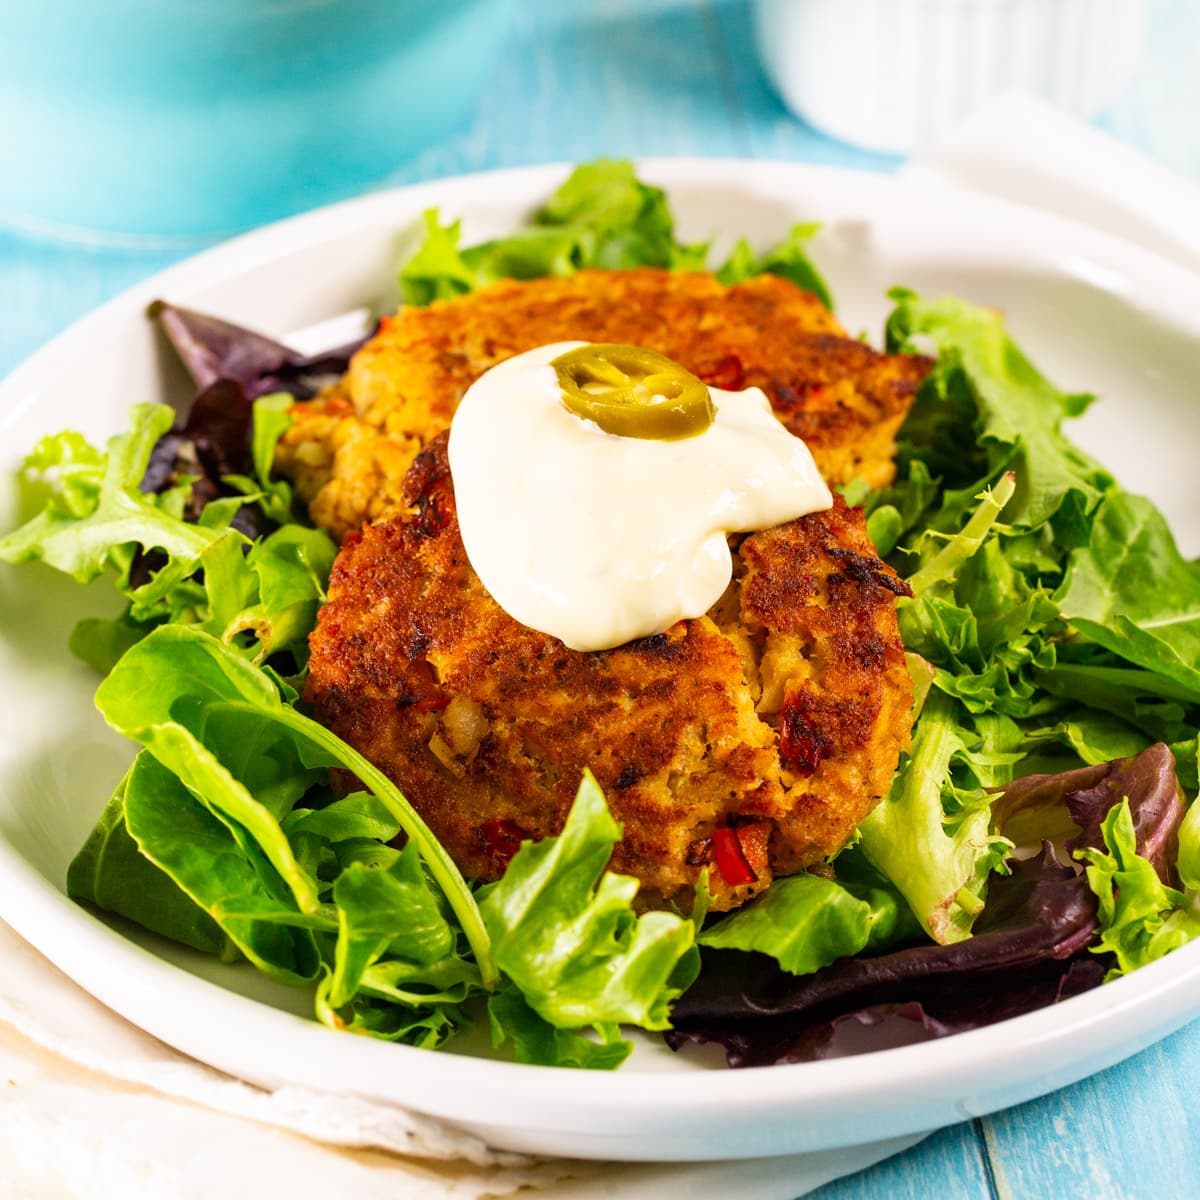 Cajun Salmon Cakes on a bed of mixed greens.